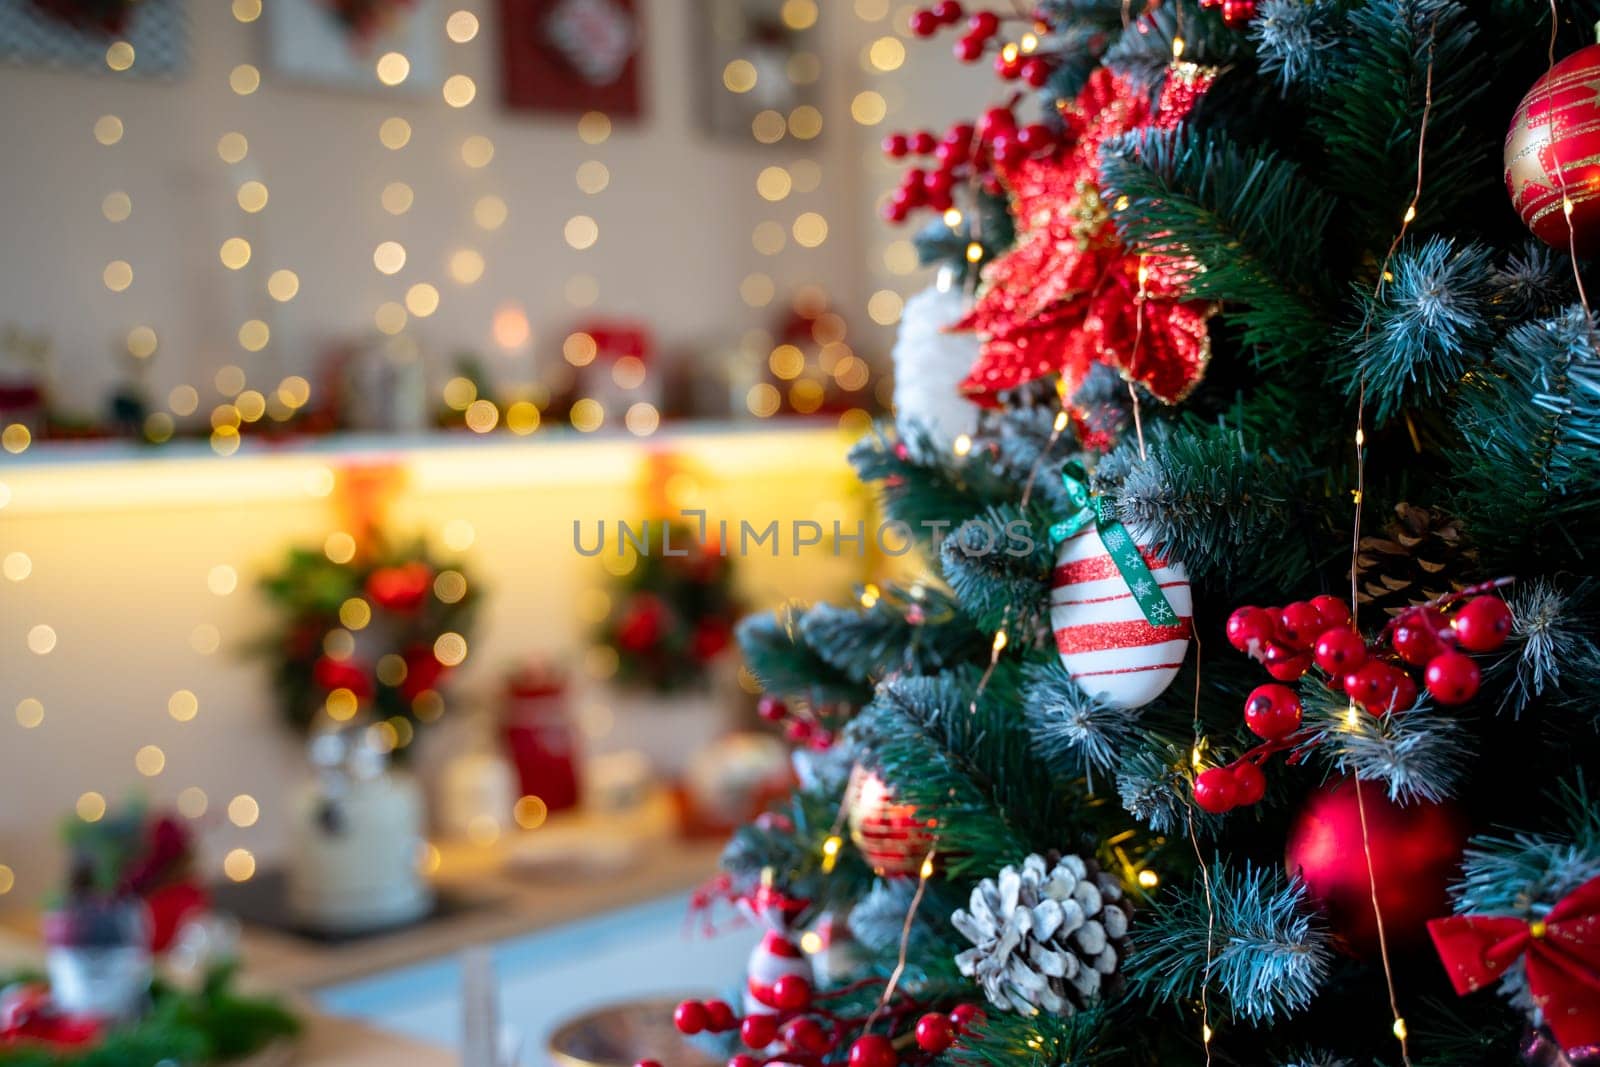 Christmas Tree with Decoration On A Winter Background With Bright Lights by Matiunina